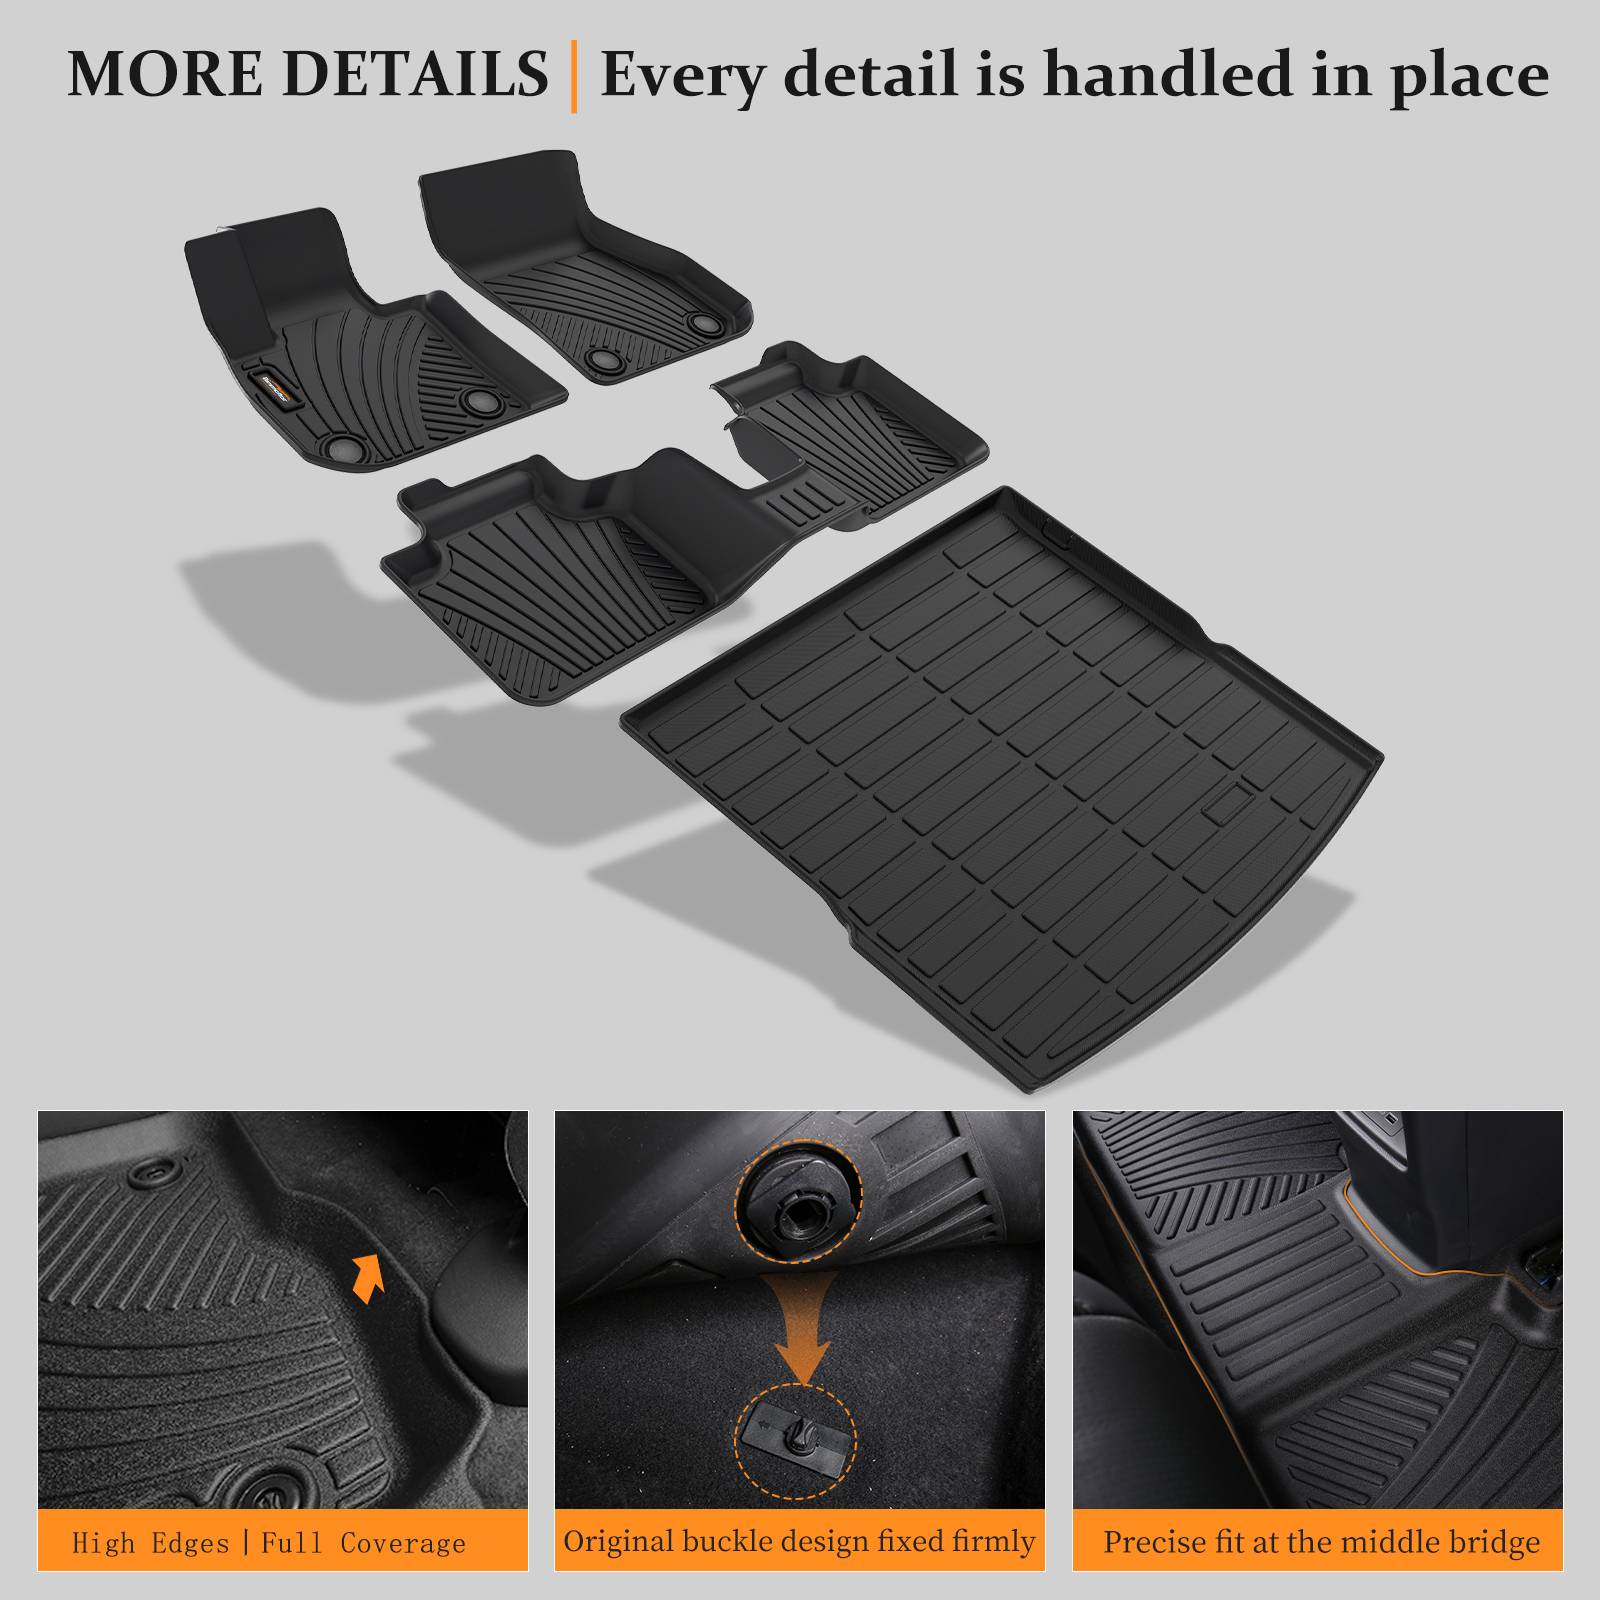 Binmotor-Floor Mats for All Weather Floor Mats for Toyota Prius Prime, 1st & 2nd Row Full Set, Heavy Duty Car Floor Liners-Black Prius Accessories（compatible year 2016-2022）